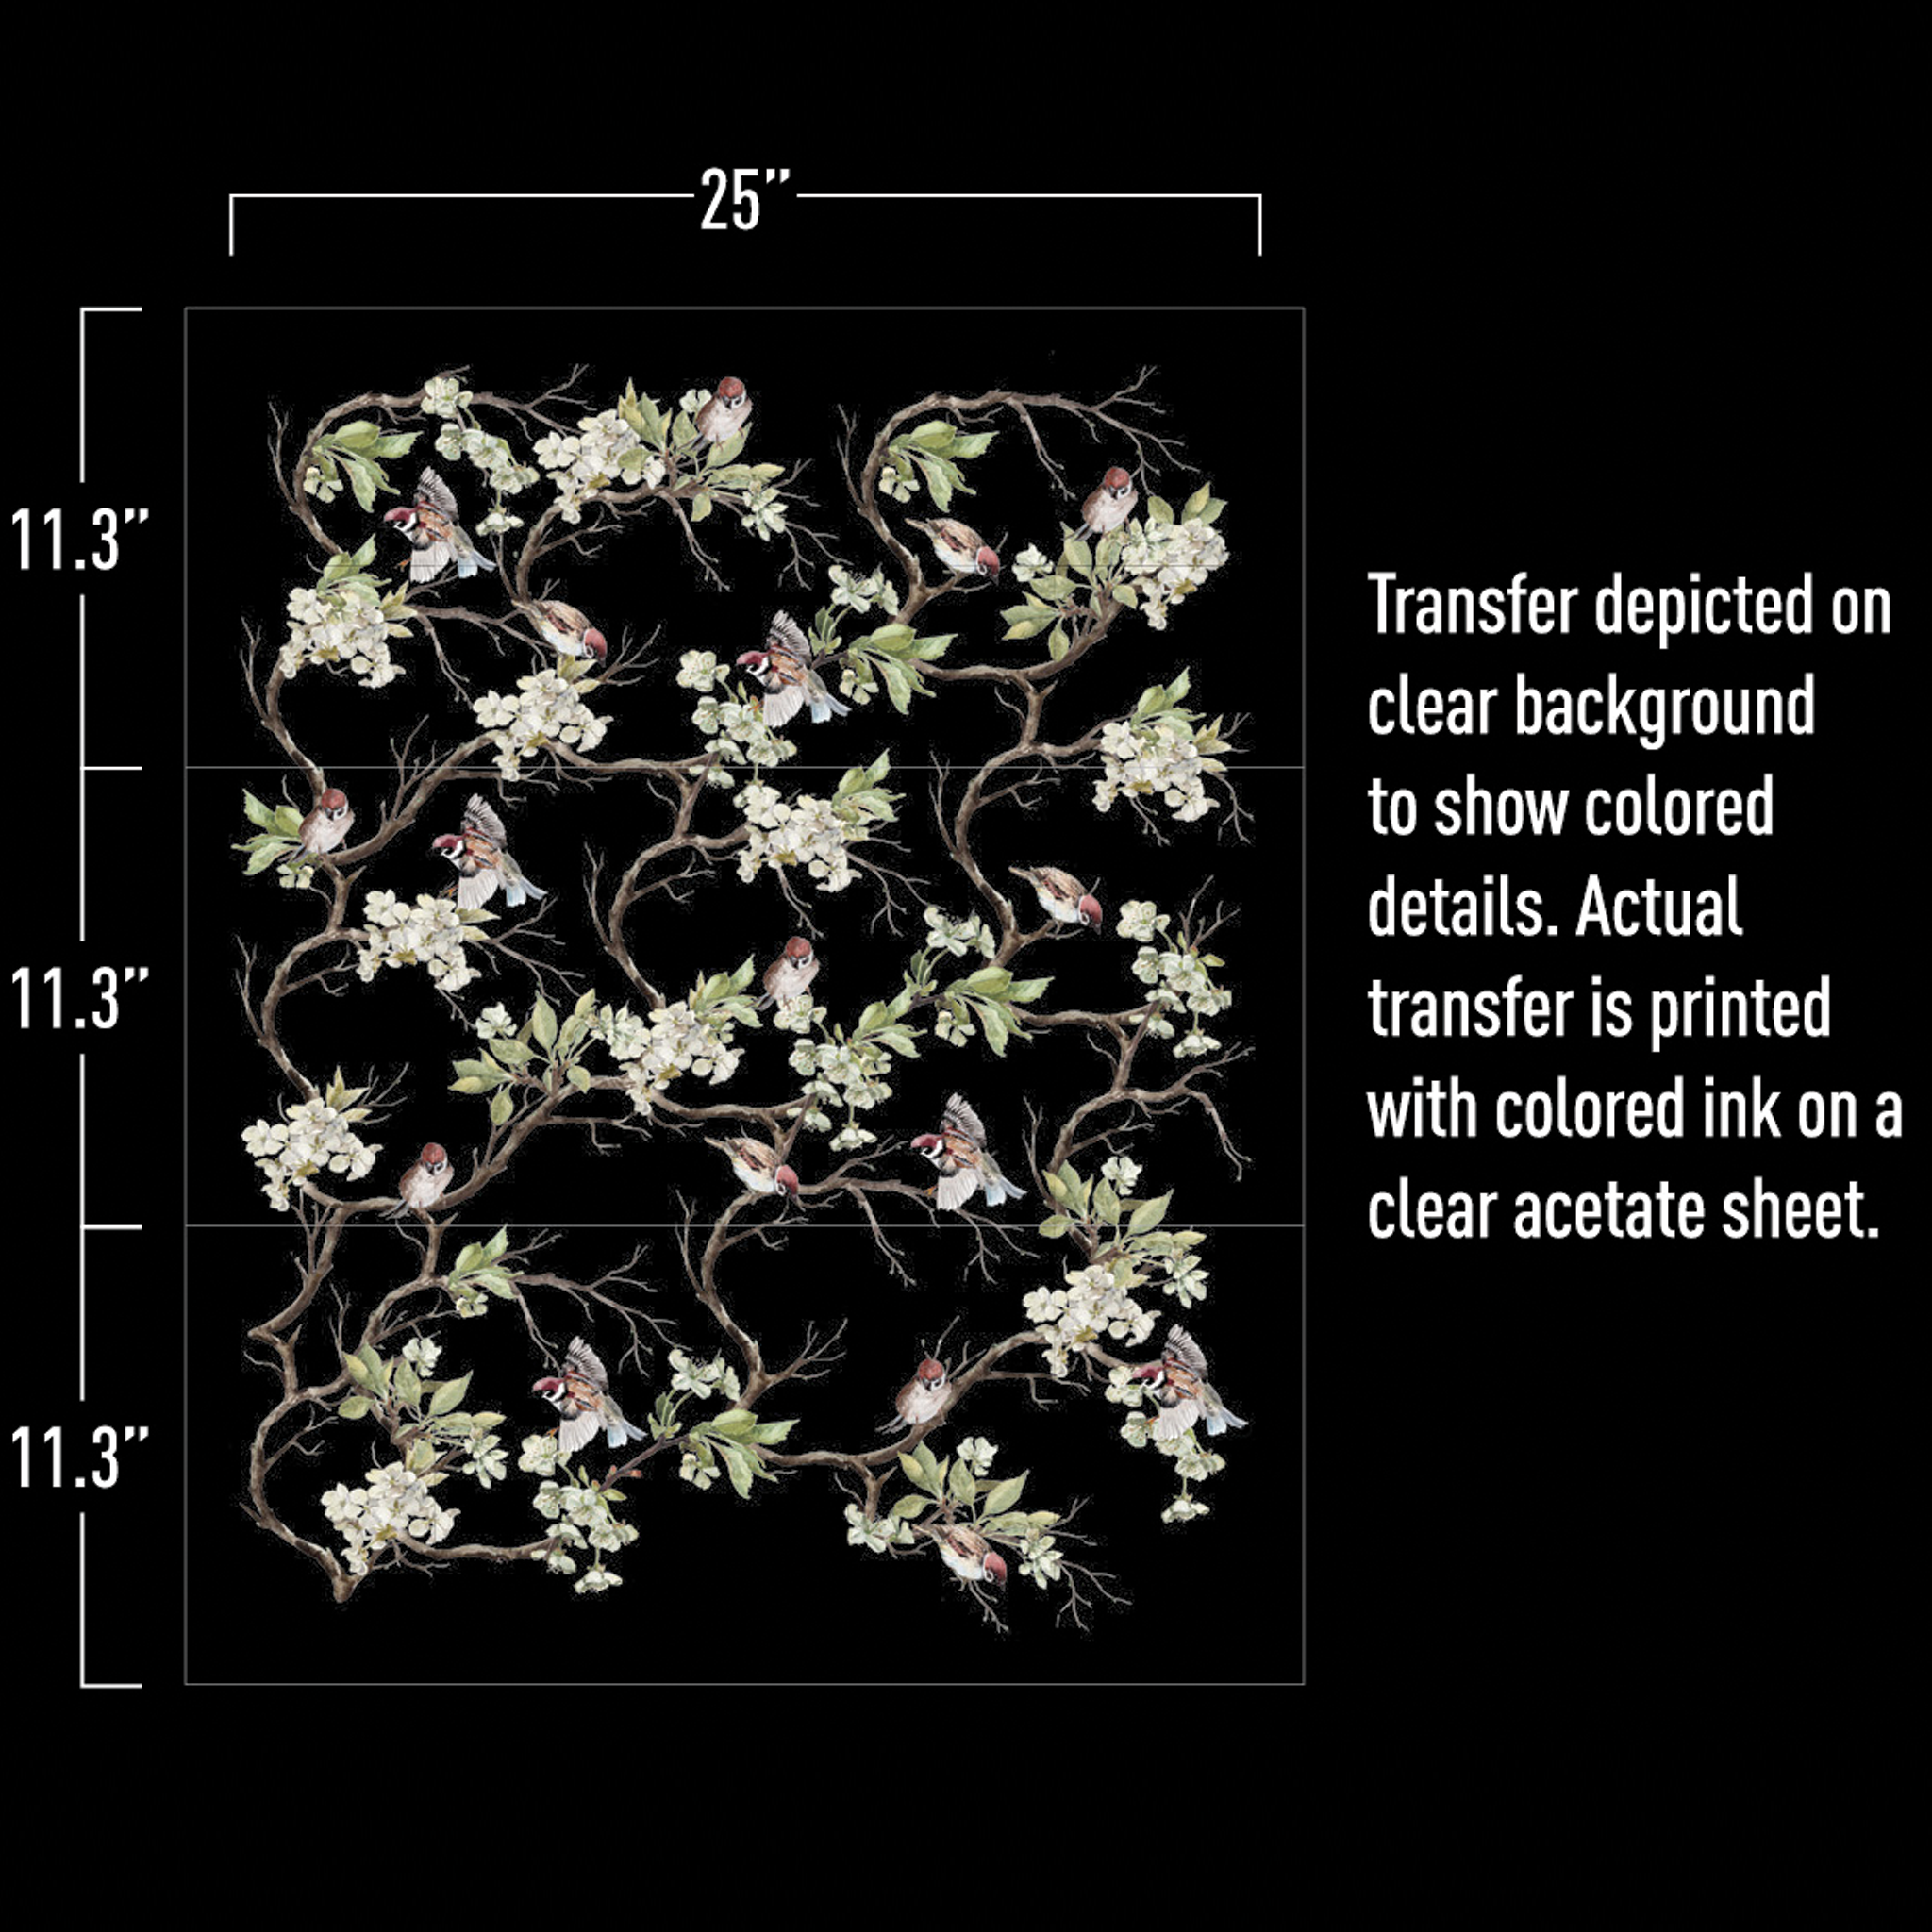 Blossom Flight transfer design with measurements in white reading:  25'. 11.3". 11.3". 11.3".  Transfer depicted on a clear background to show colored details. Actual transfer is printed with colored ink on a clear acetate sheet.